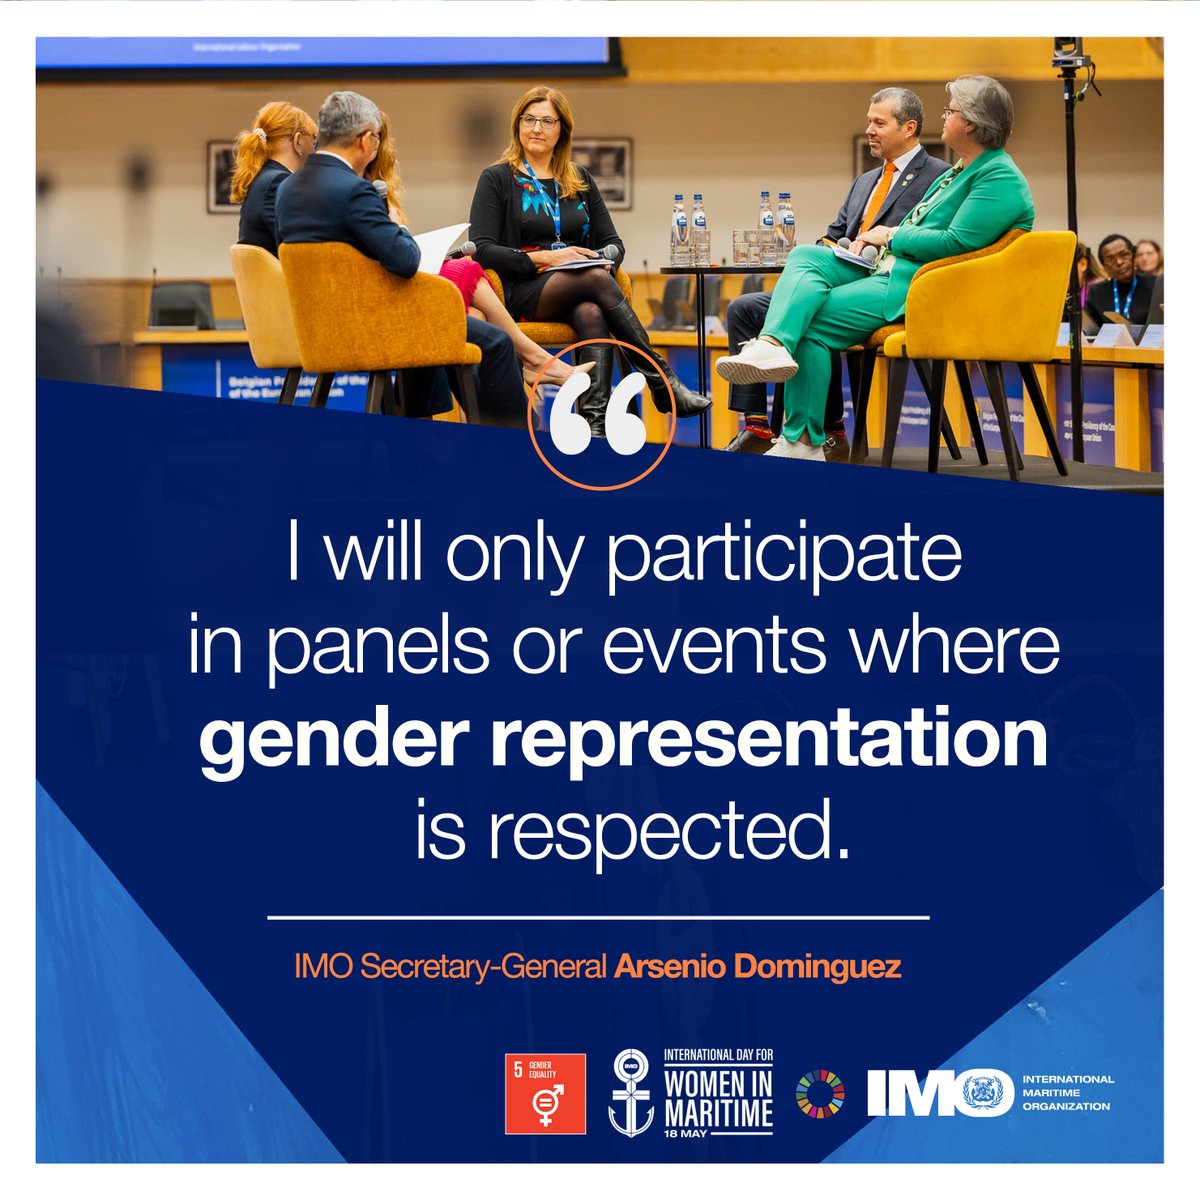 You already know that in me you have a champion that will focus on actions, and lead by example. Ahead of the International Day for Women in Maritime tomorrow (18 May) I reiterate my pledge to only take part in panels where gender representation is respected. #WomenInMaritimeDay